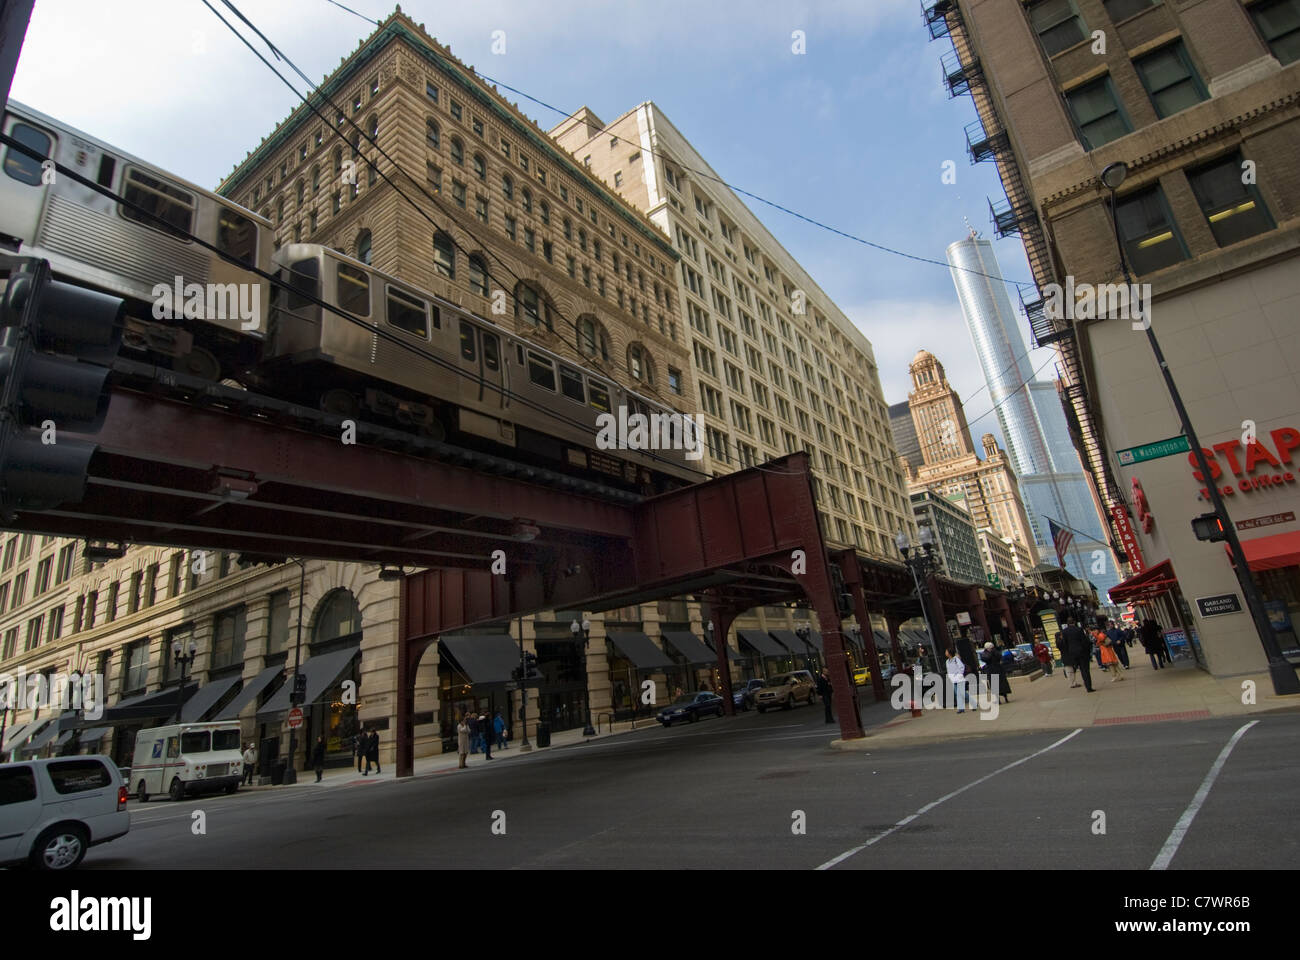 The El train  on Wabash Ave in Chicago Stock Photo